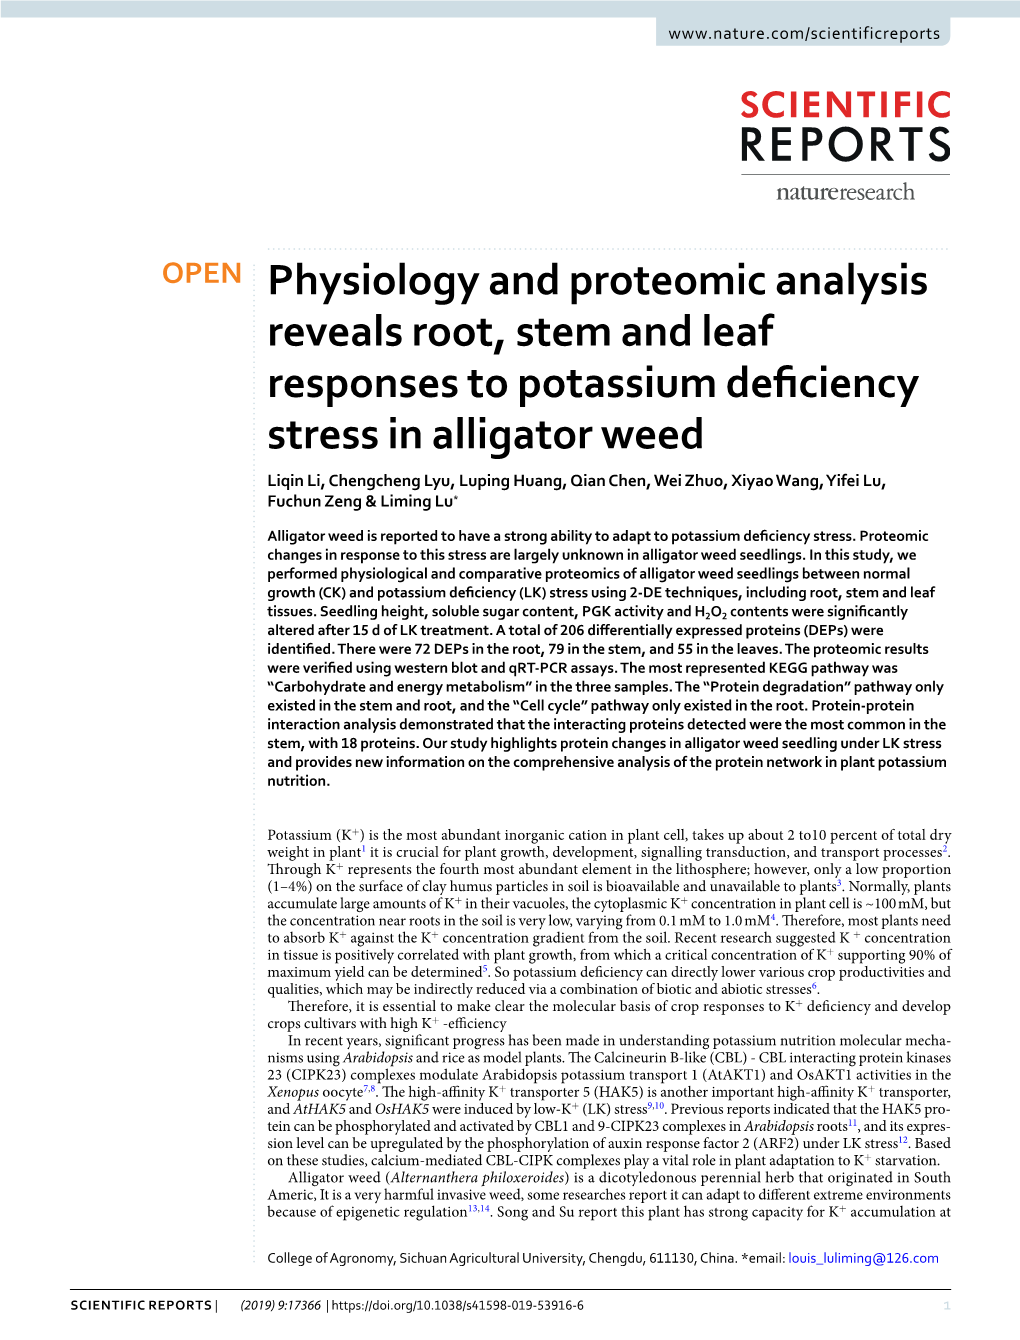 Physiology and Proteomic Analysis Reveals Root, Stem and Leaf Responses to Potassium Deficiency Stress in Alligator Weed